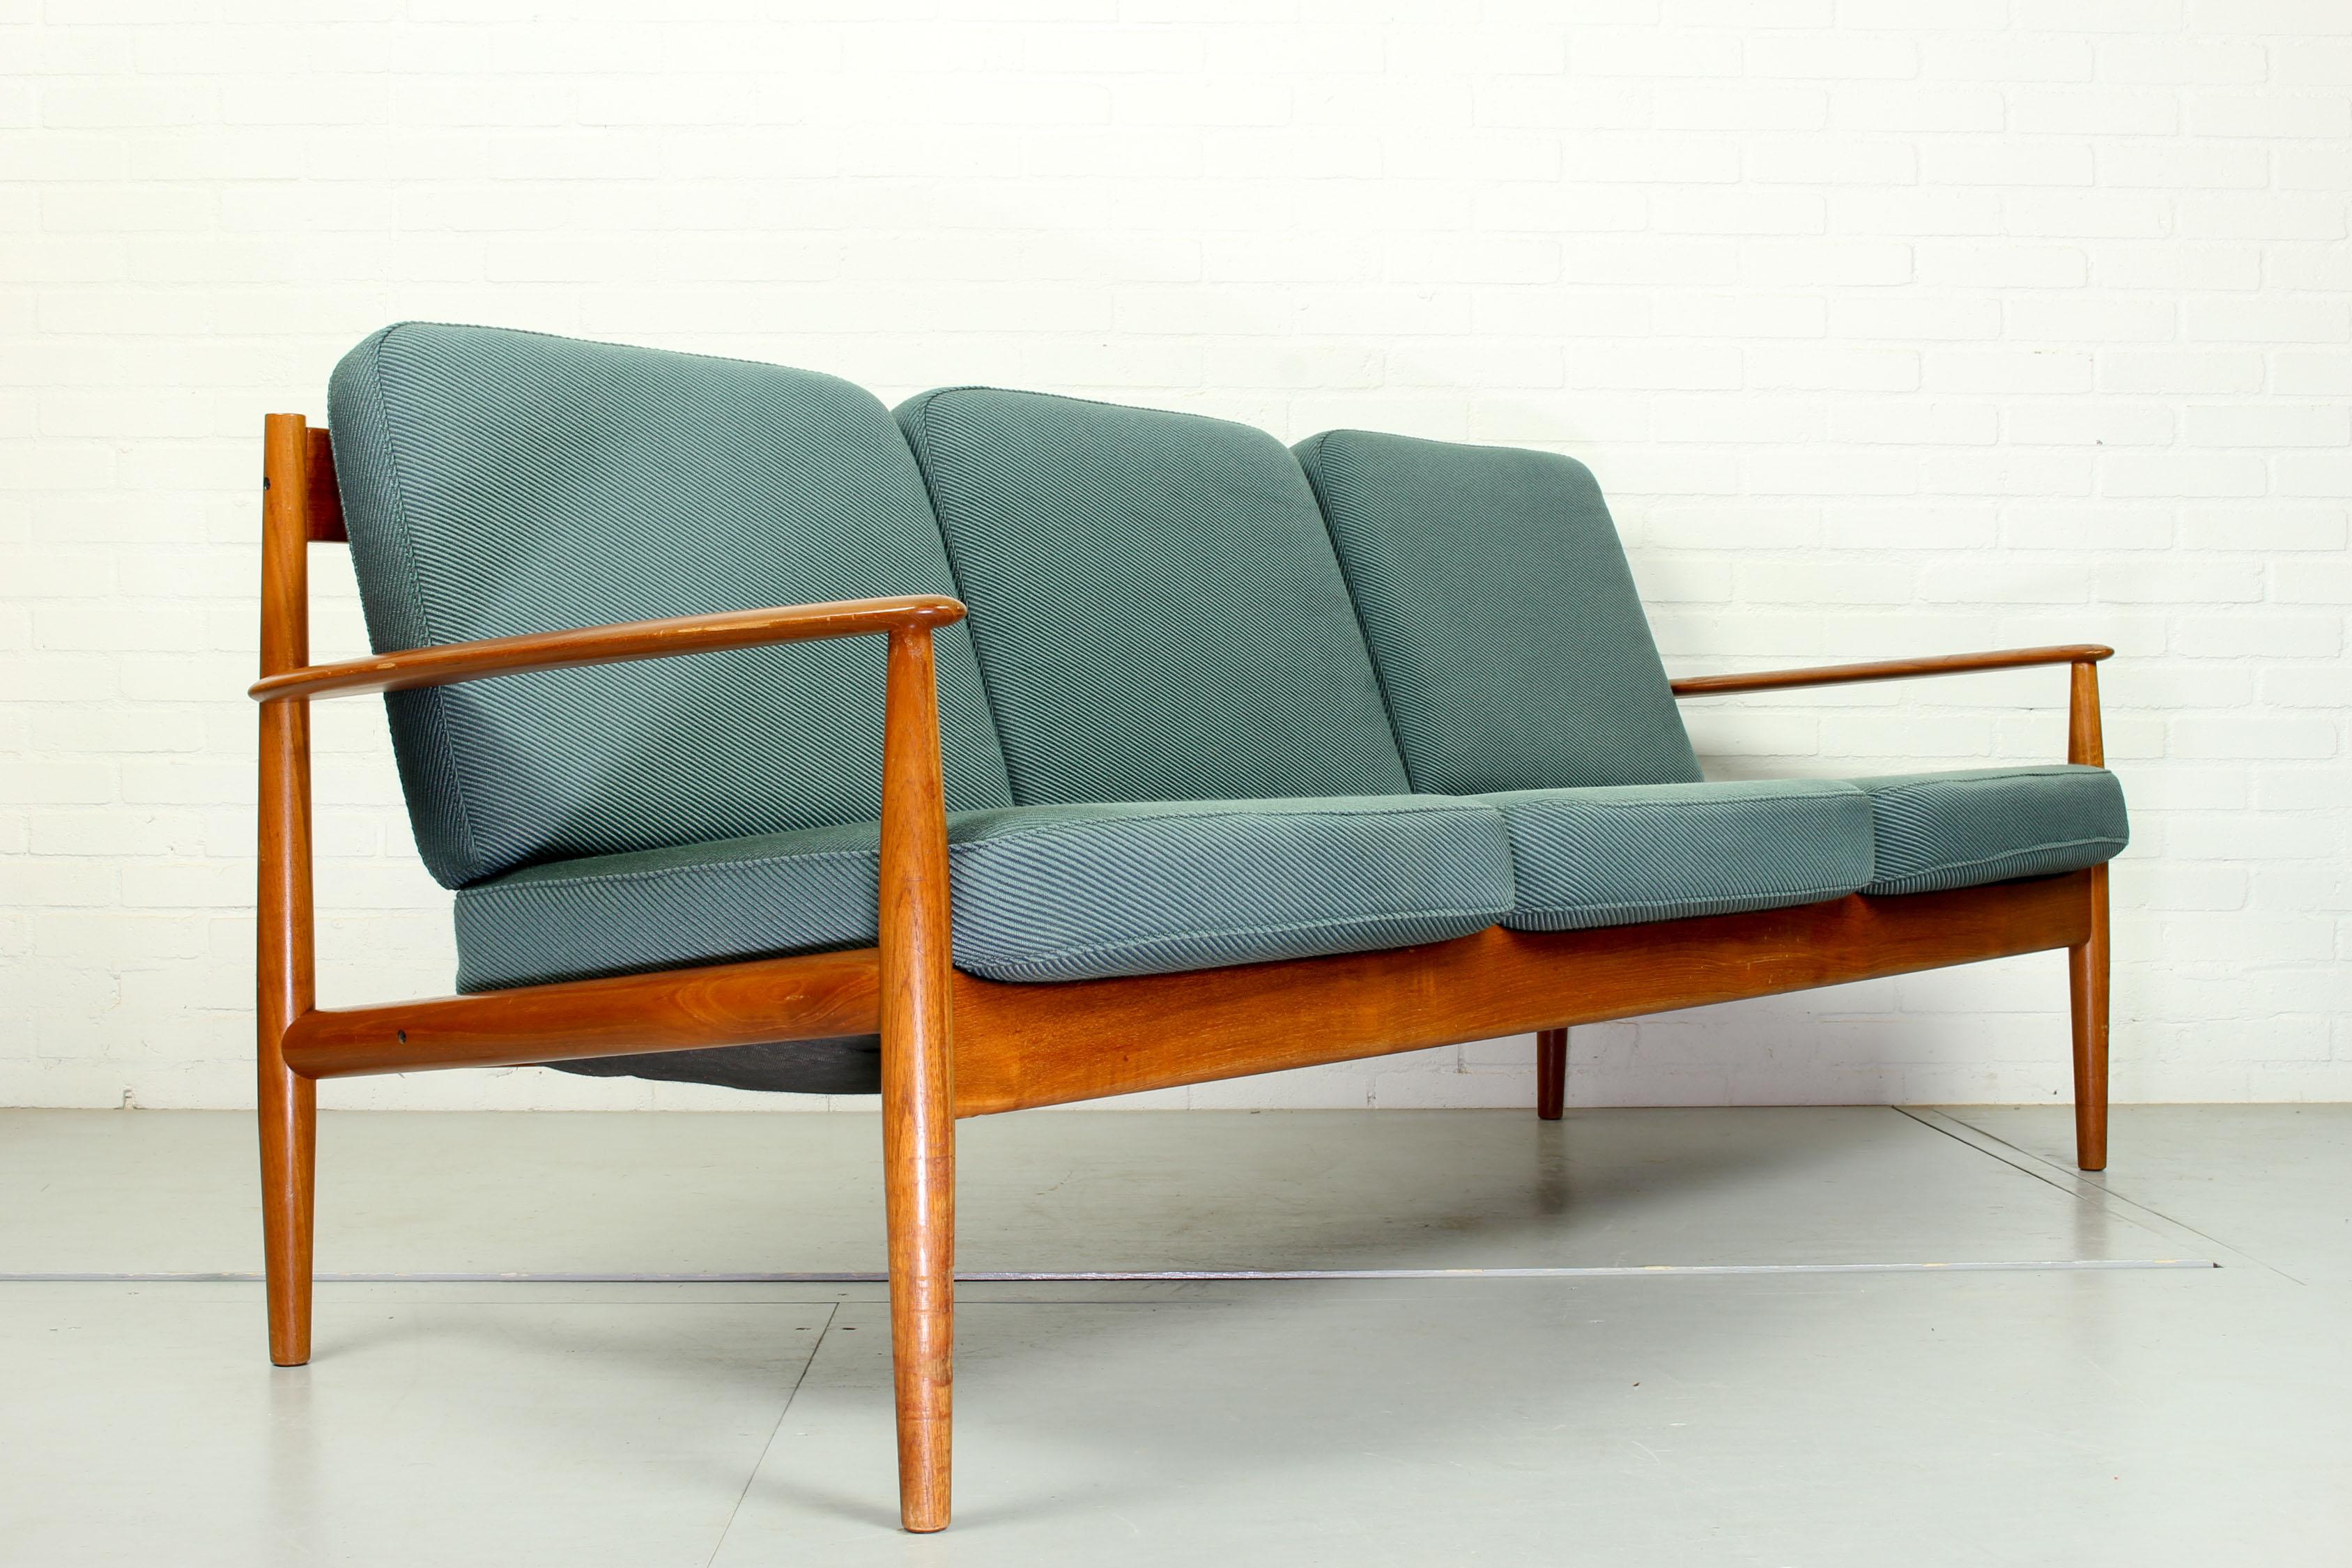 Scandinavian Mid-Century Modern design three-seat teak sofa designed by Grete Jalk for France & Son Denmark, 1963. Model No: 118-3. Beautifully sculpted teak frame. The blue/grey color cushions are in good condition. Originally marked as shown on